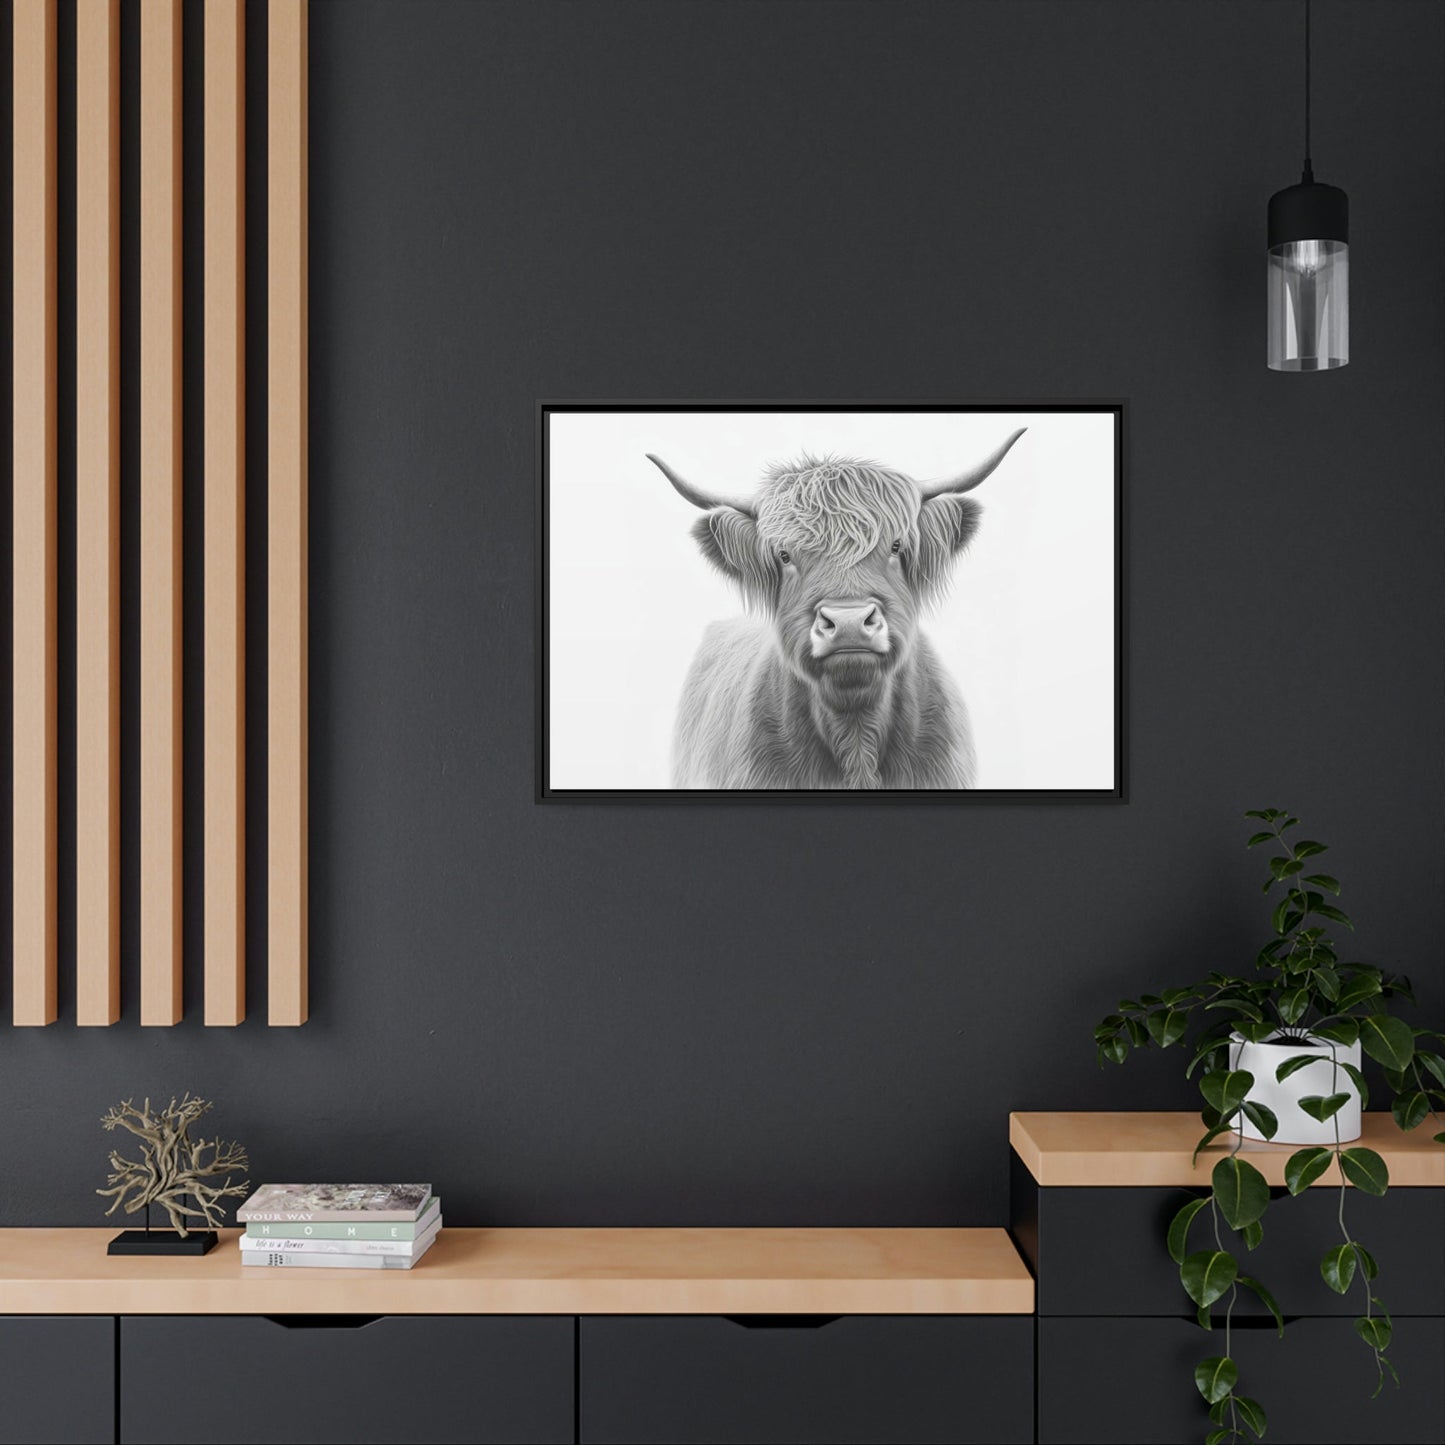 Artistic Whimsy: Framed Poster Wall Art Featuring a Playful Cow Portrait on Canvas